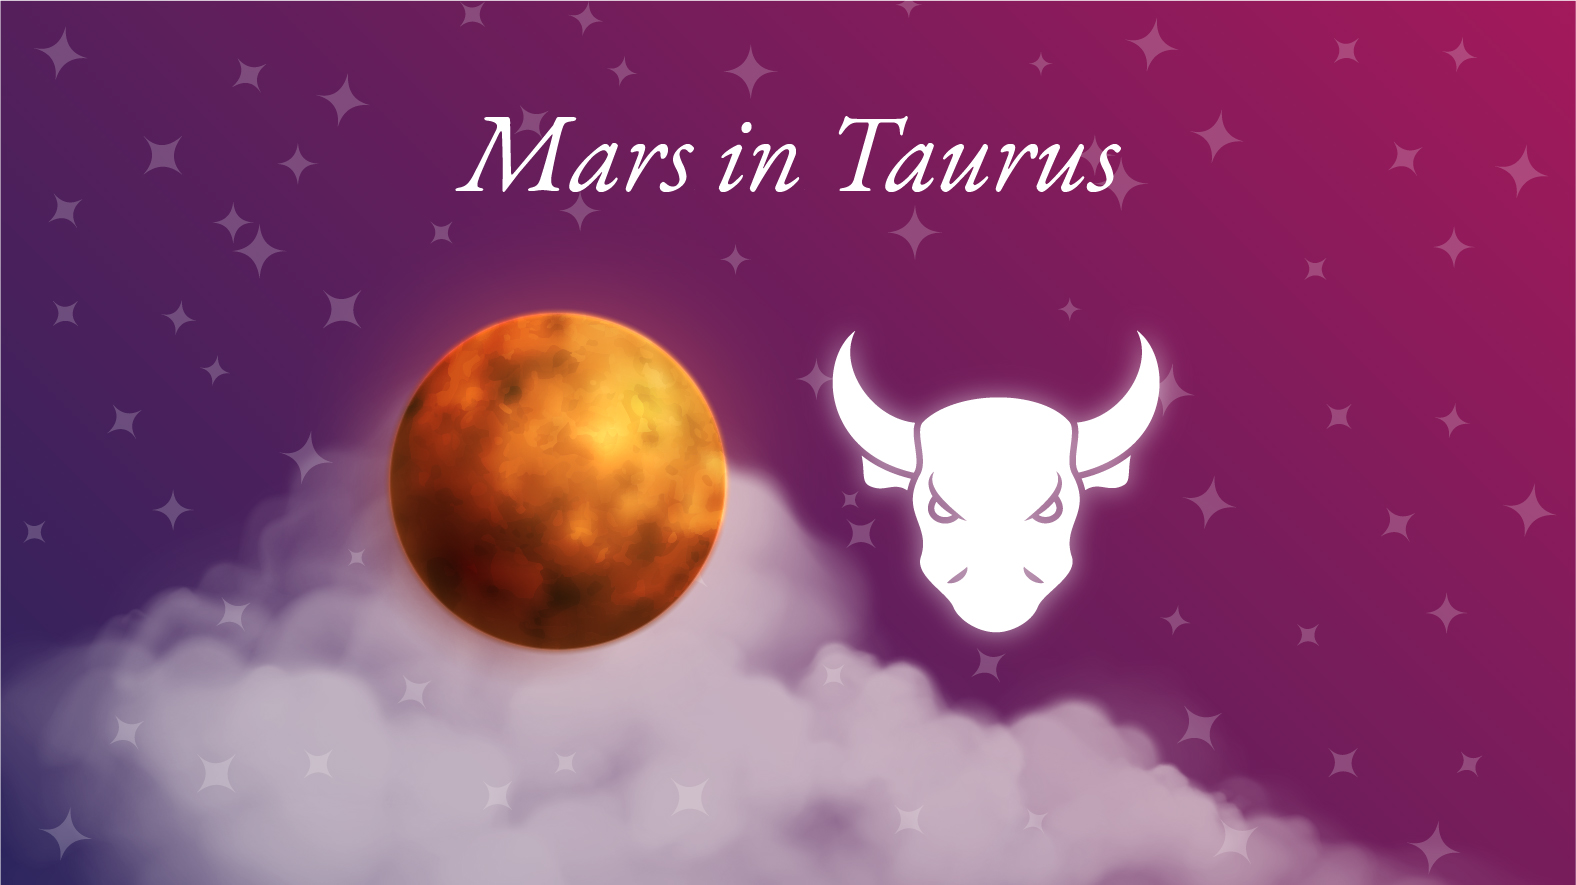 Mars in Taurus Meaning